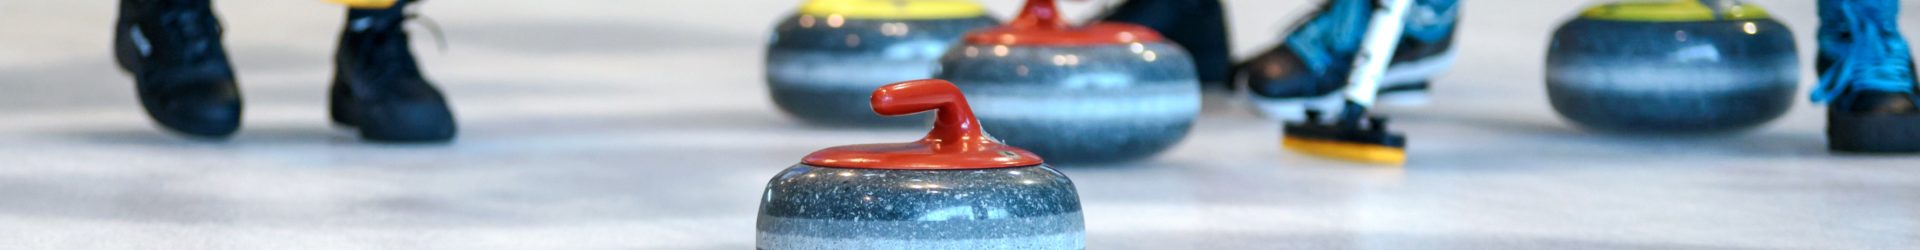 Curling Club Gstaad